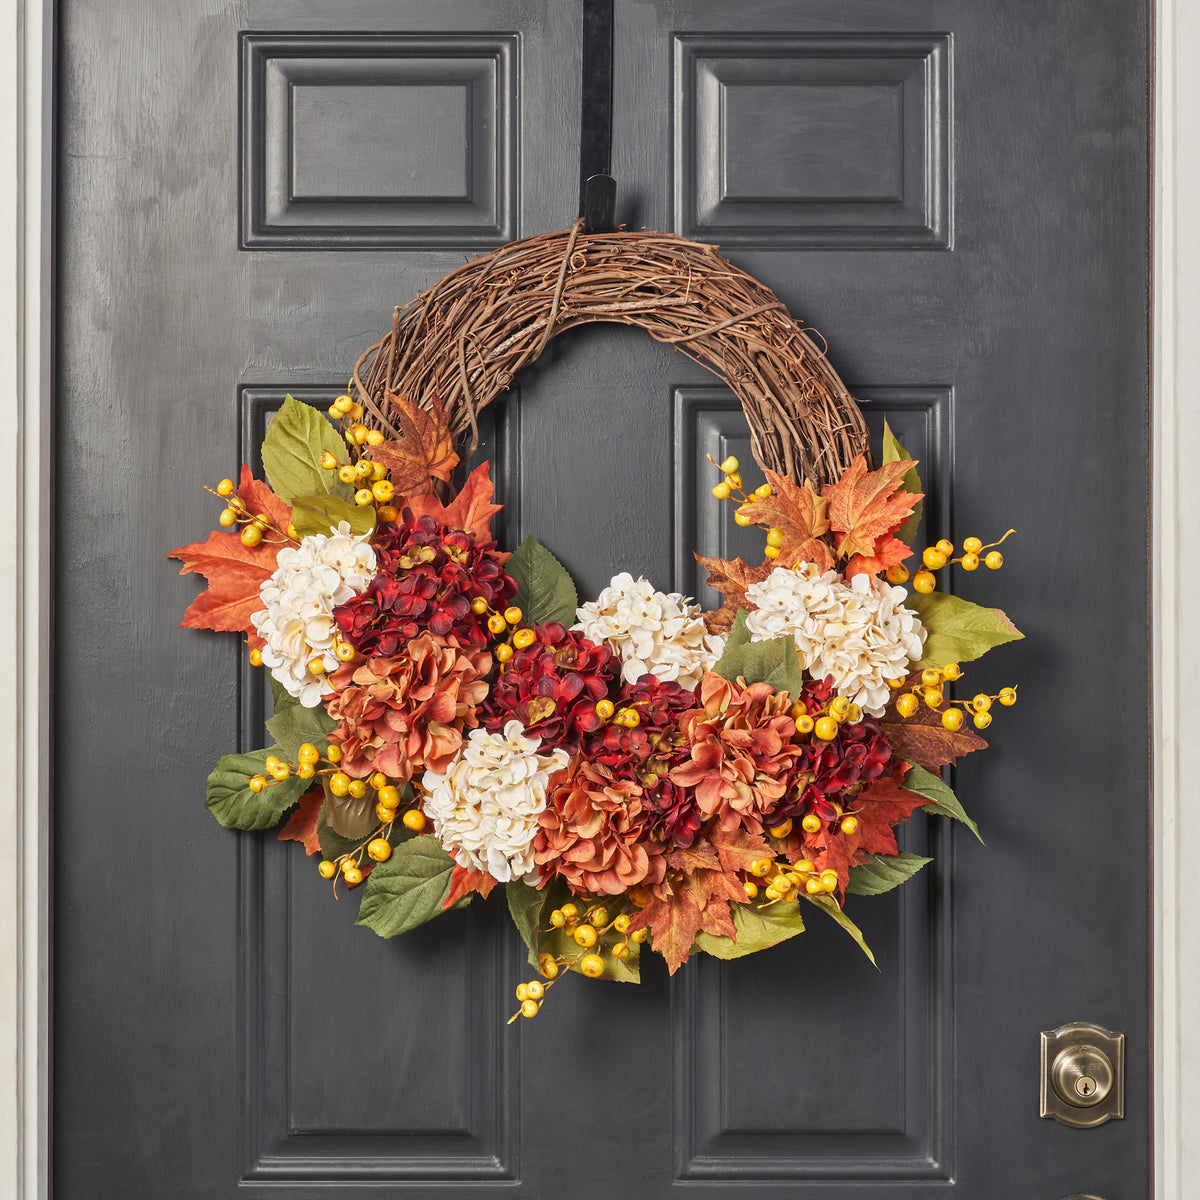 Year Round Wreath for Front Door, Everyday Burgundy Red Wreath With  Initial, Hydrangea Wreath, Personalized Gift, Wreaths 